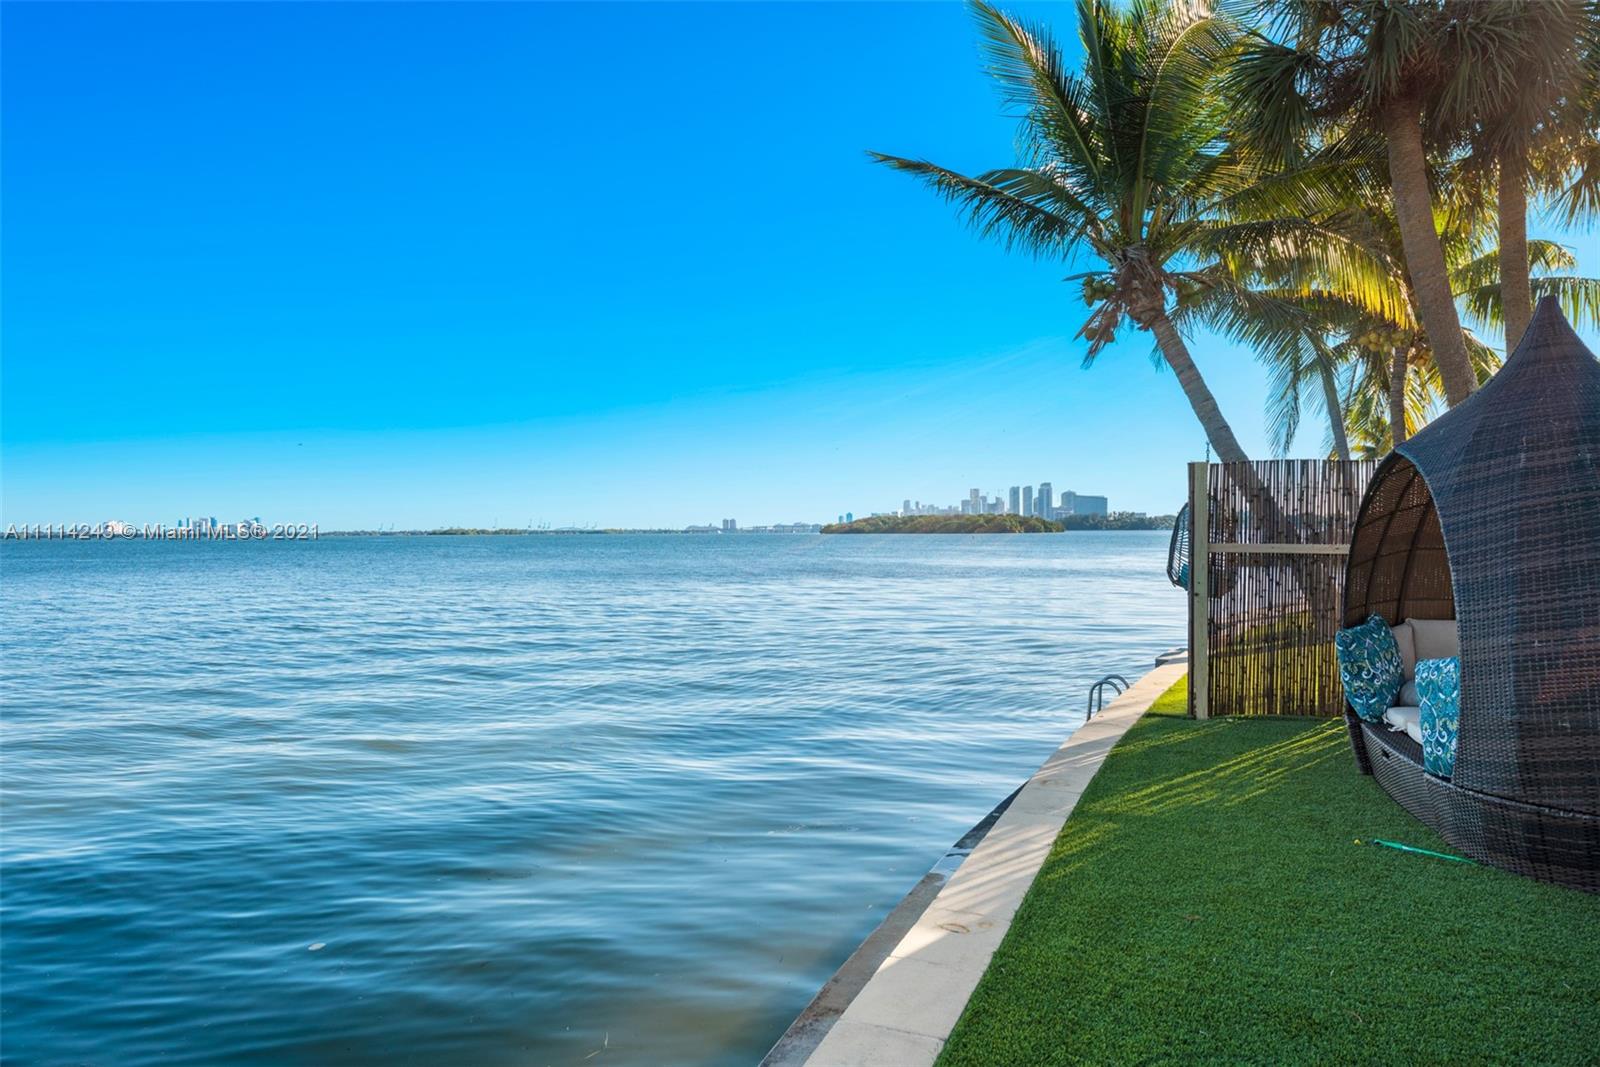 162 Feet of frontage on Miami's open bay. This home has an amazing wide view,  you can sit quietly and  see the bay's natural habitat with birds and dolphins. The home features an open floor plan from the kitchen to the living room with windows running around the back for viewing the waterfront. This is also and an opportunity to build your dream home with one of Miami's best views in the gated community of Belle Meade Island. Home to many new single family new construction, this is a great location very close to Miami's Design District for shopping and restaurants.